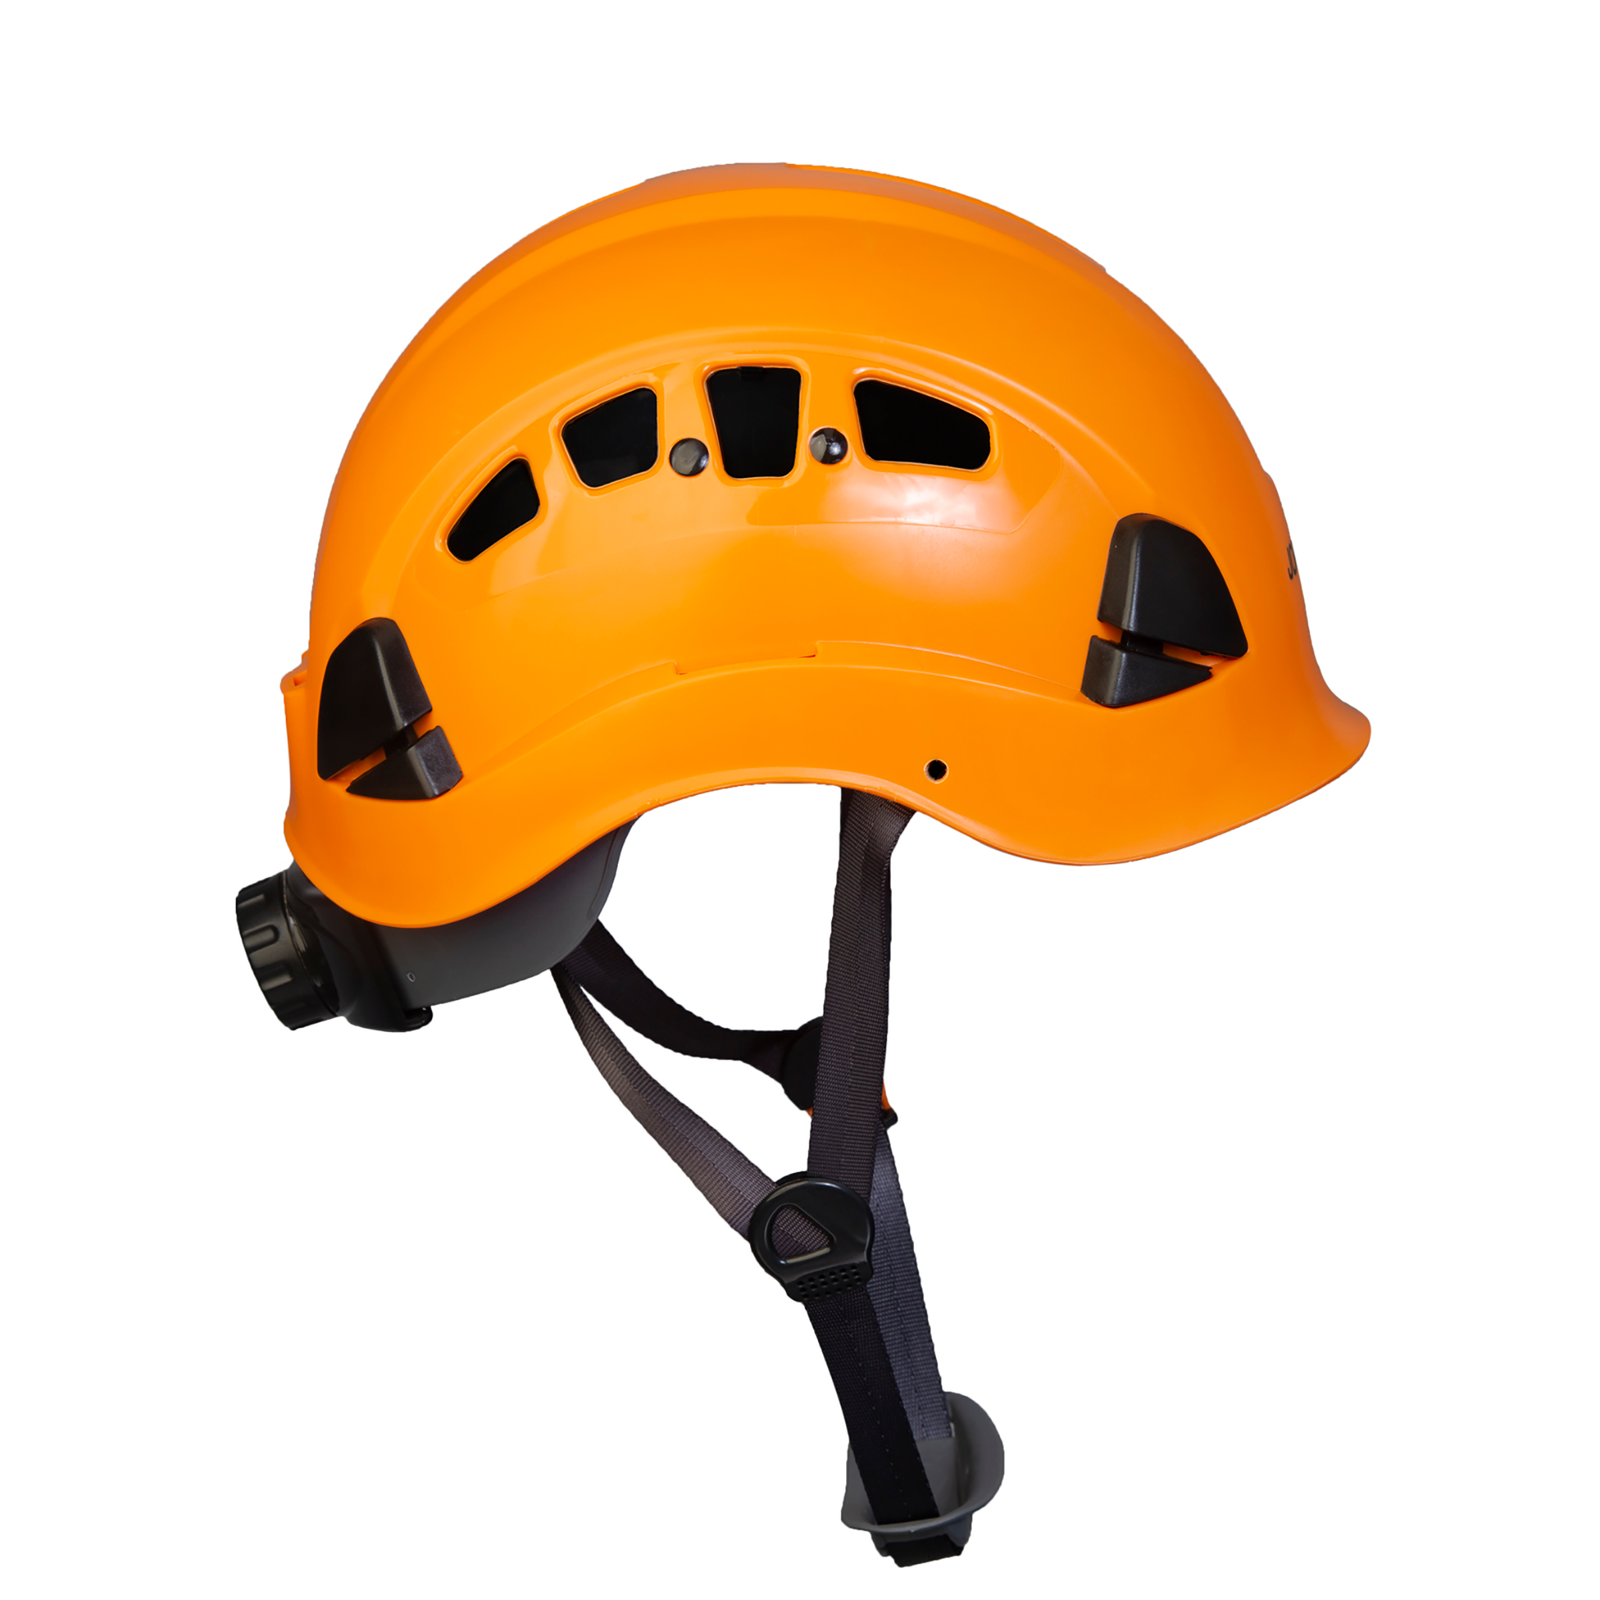 Side view of the Jorestech orange ventilated rescue hard hat Type 1 Class C with adjustable 6 point suspension and black chip strap